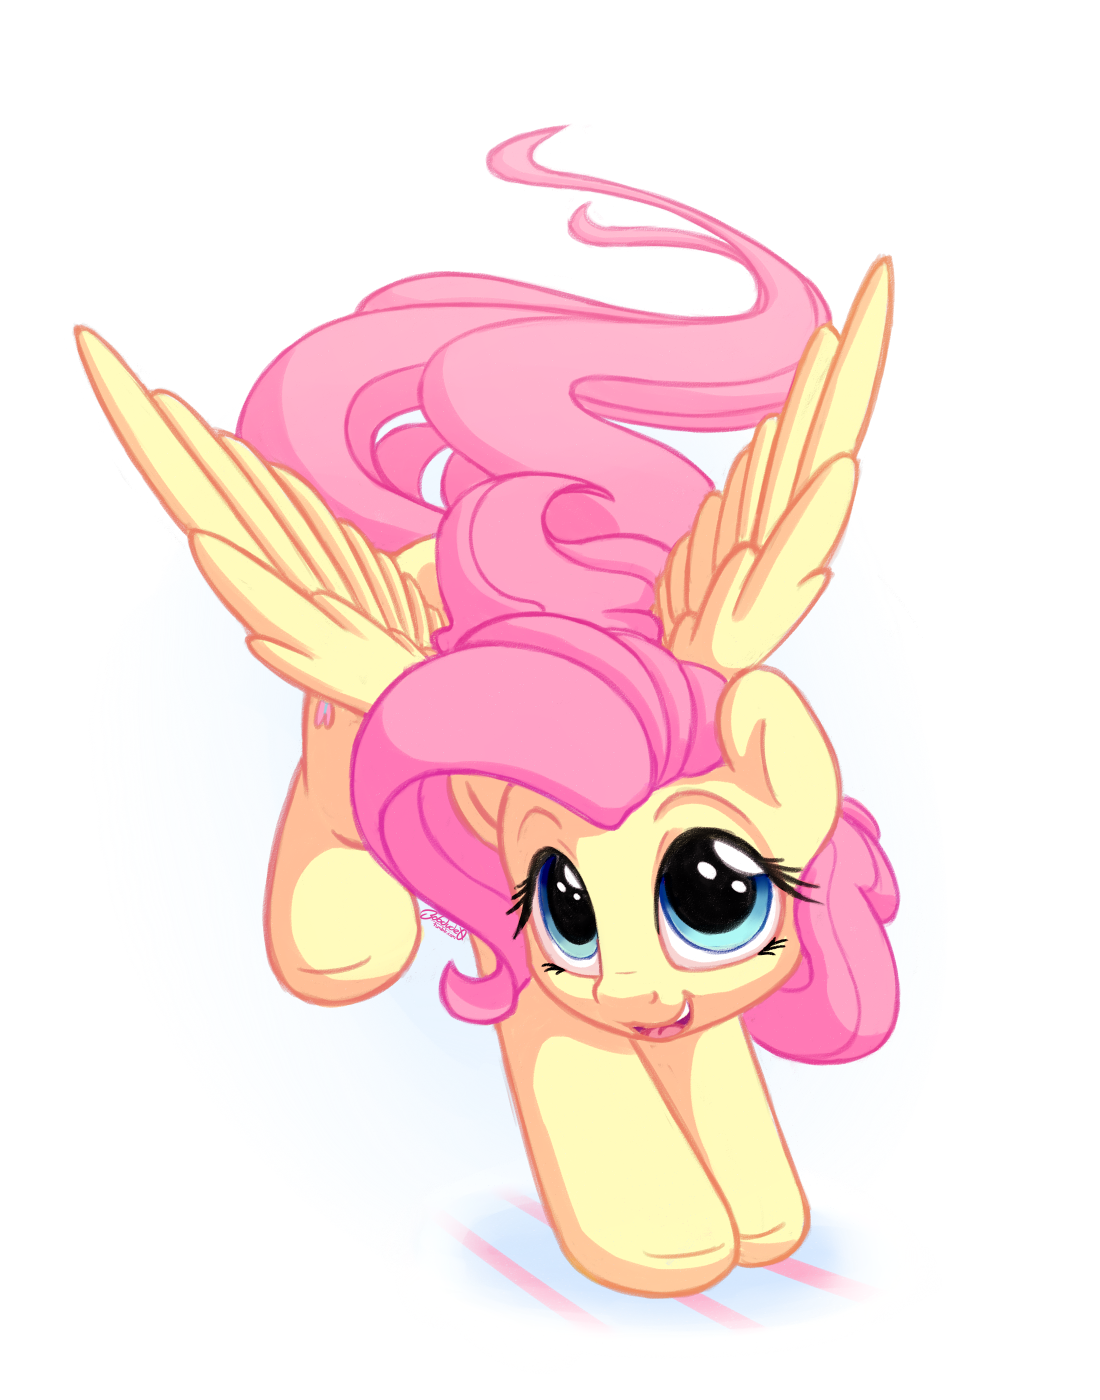 bobdude0: Truly a graceful beast, the flying butter horse is known for it’s soft